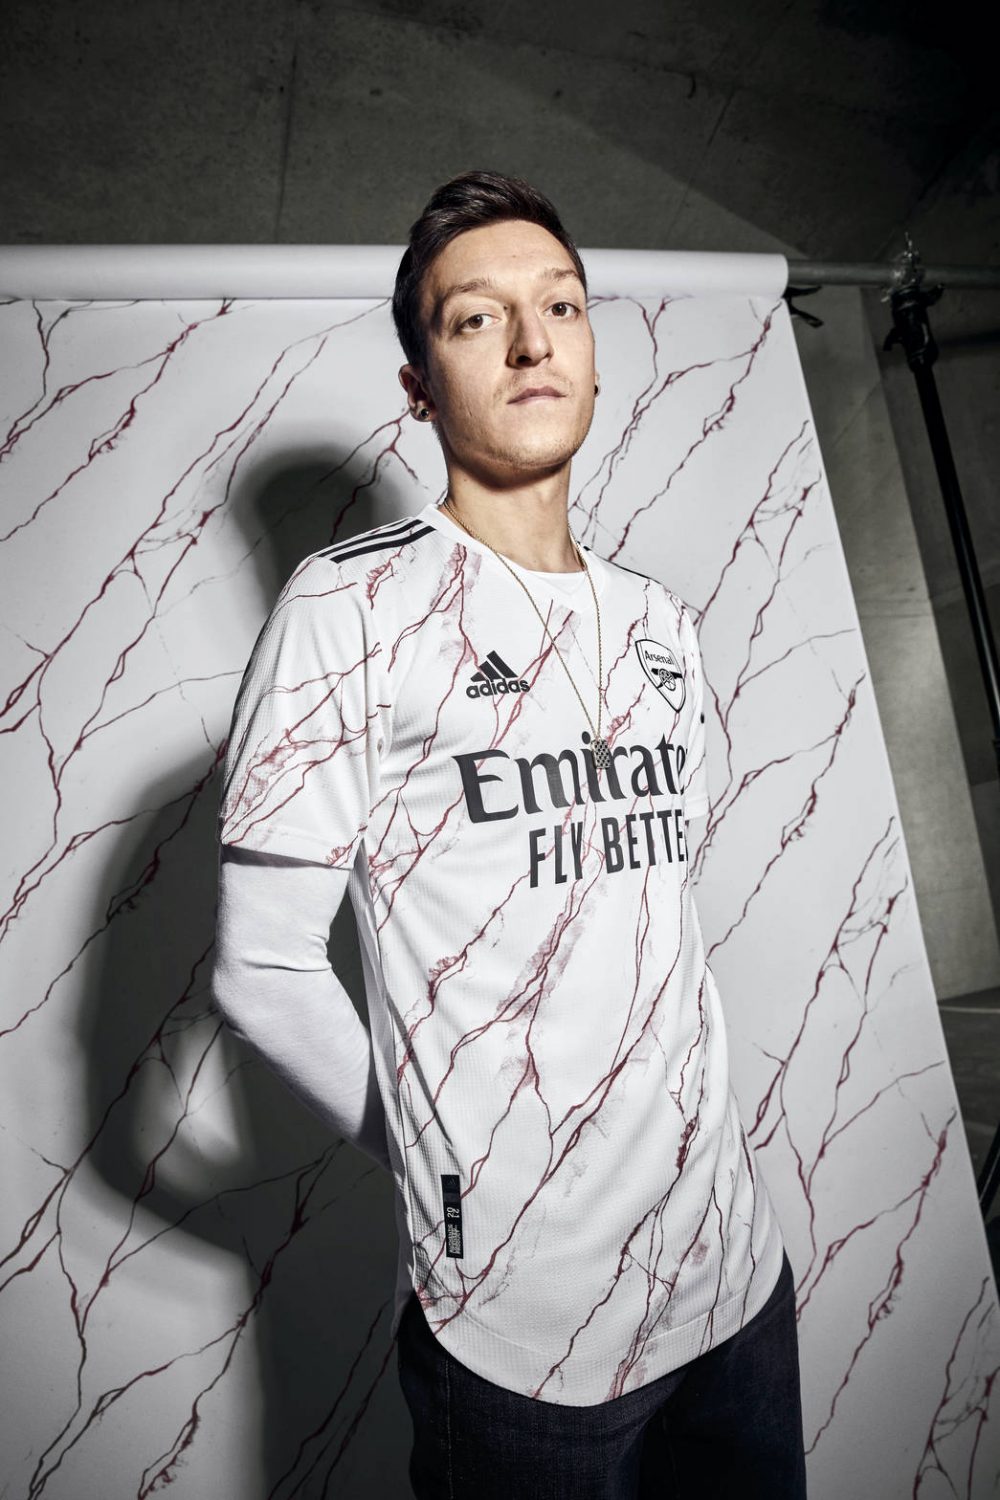 Will we ever get to see Mesut wear this on the pitch?